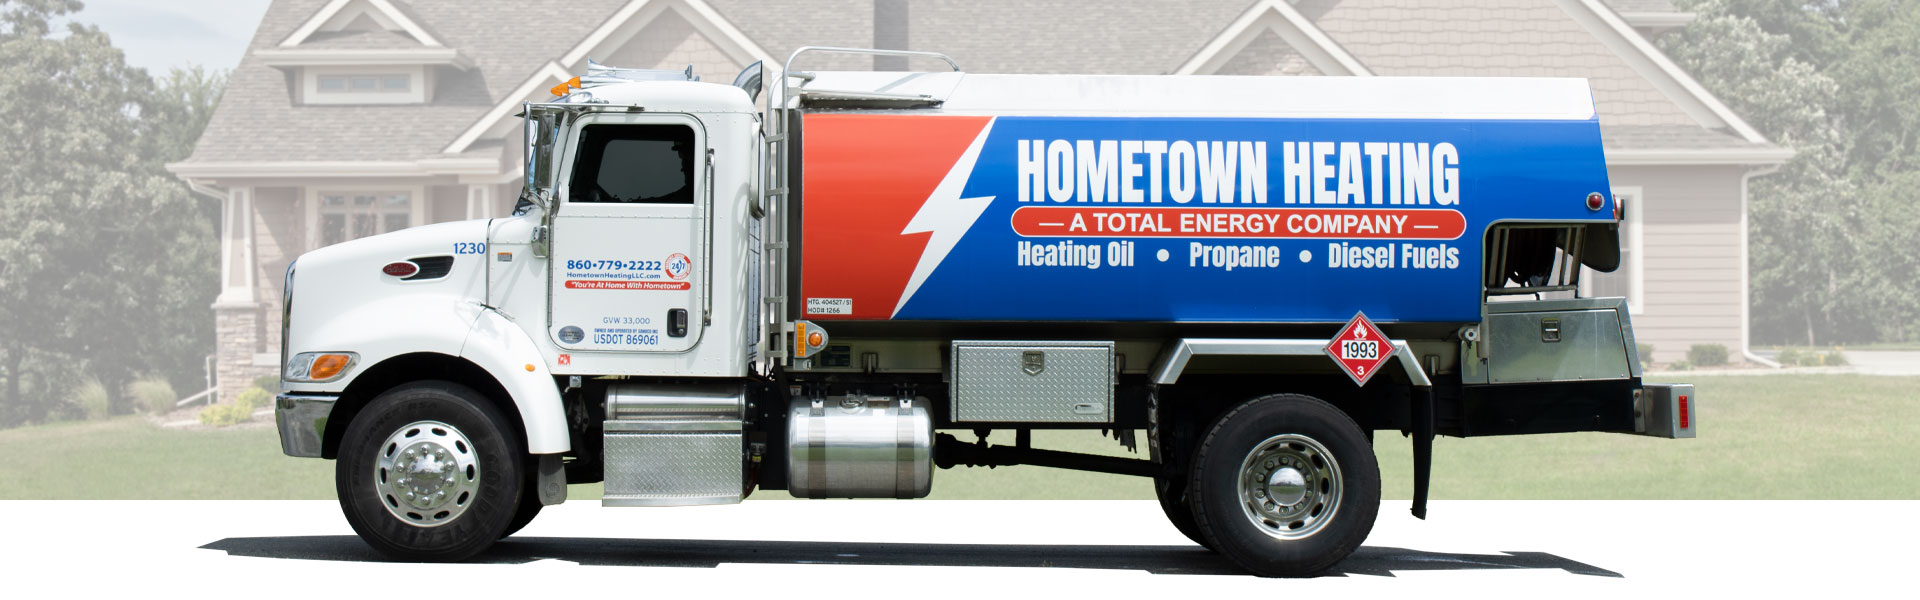 Hometown Heating delivering of Heating Oil to a homeowner in Northeastern CT